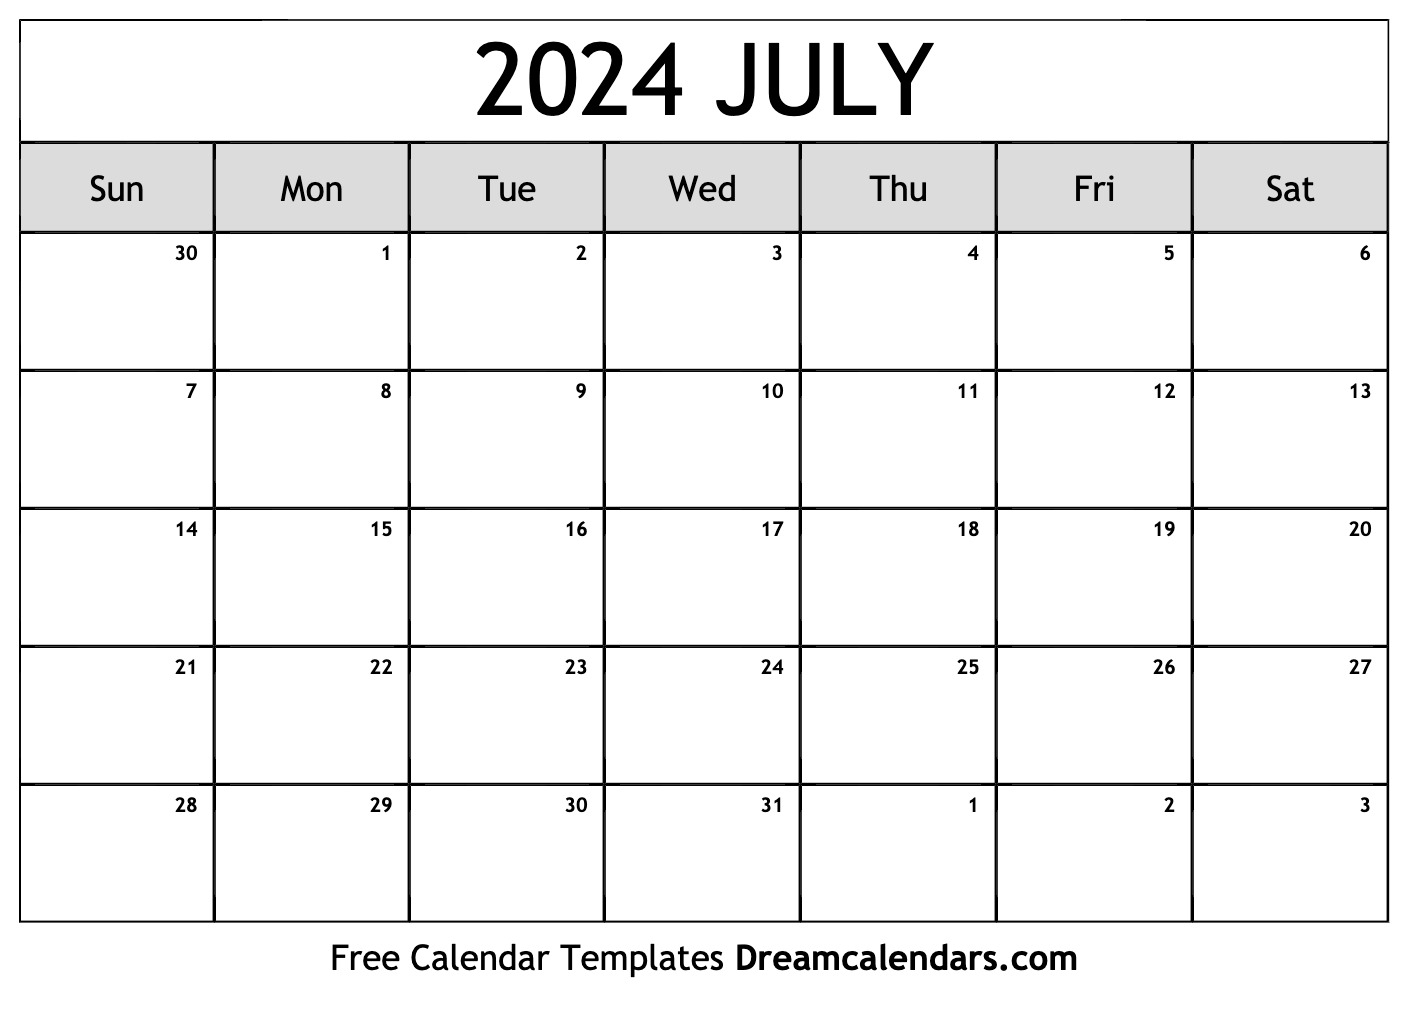 July 2024 Calendar | Free Blank Printable With Holidays for 2024 July Calendar Printable